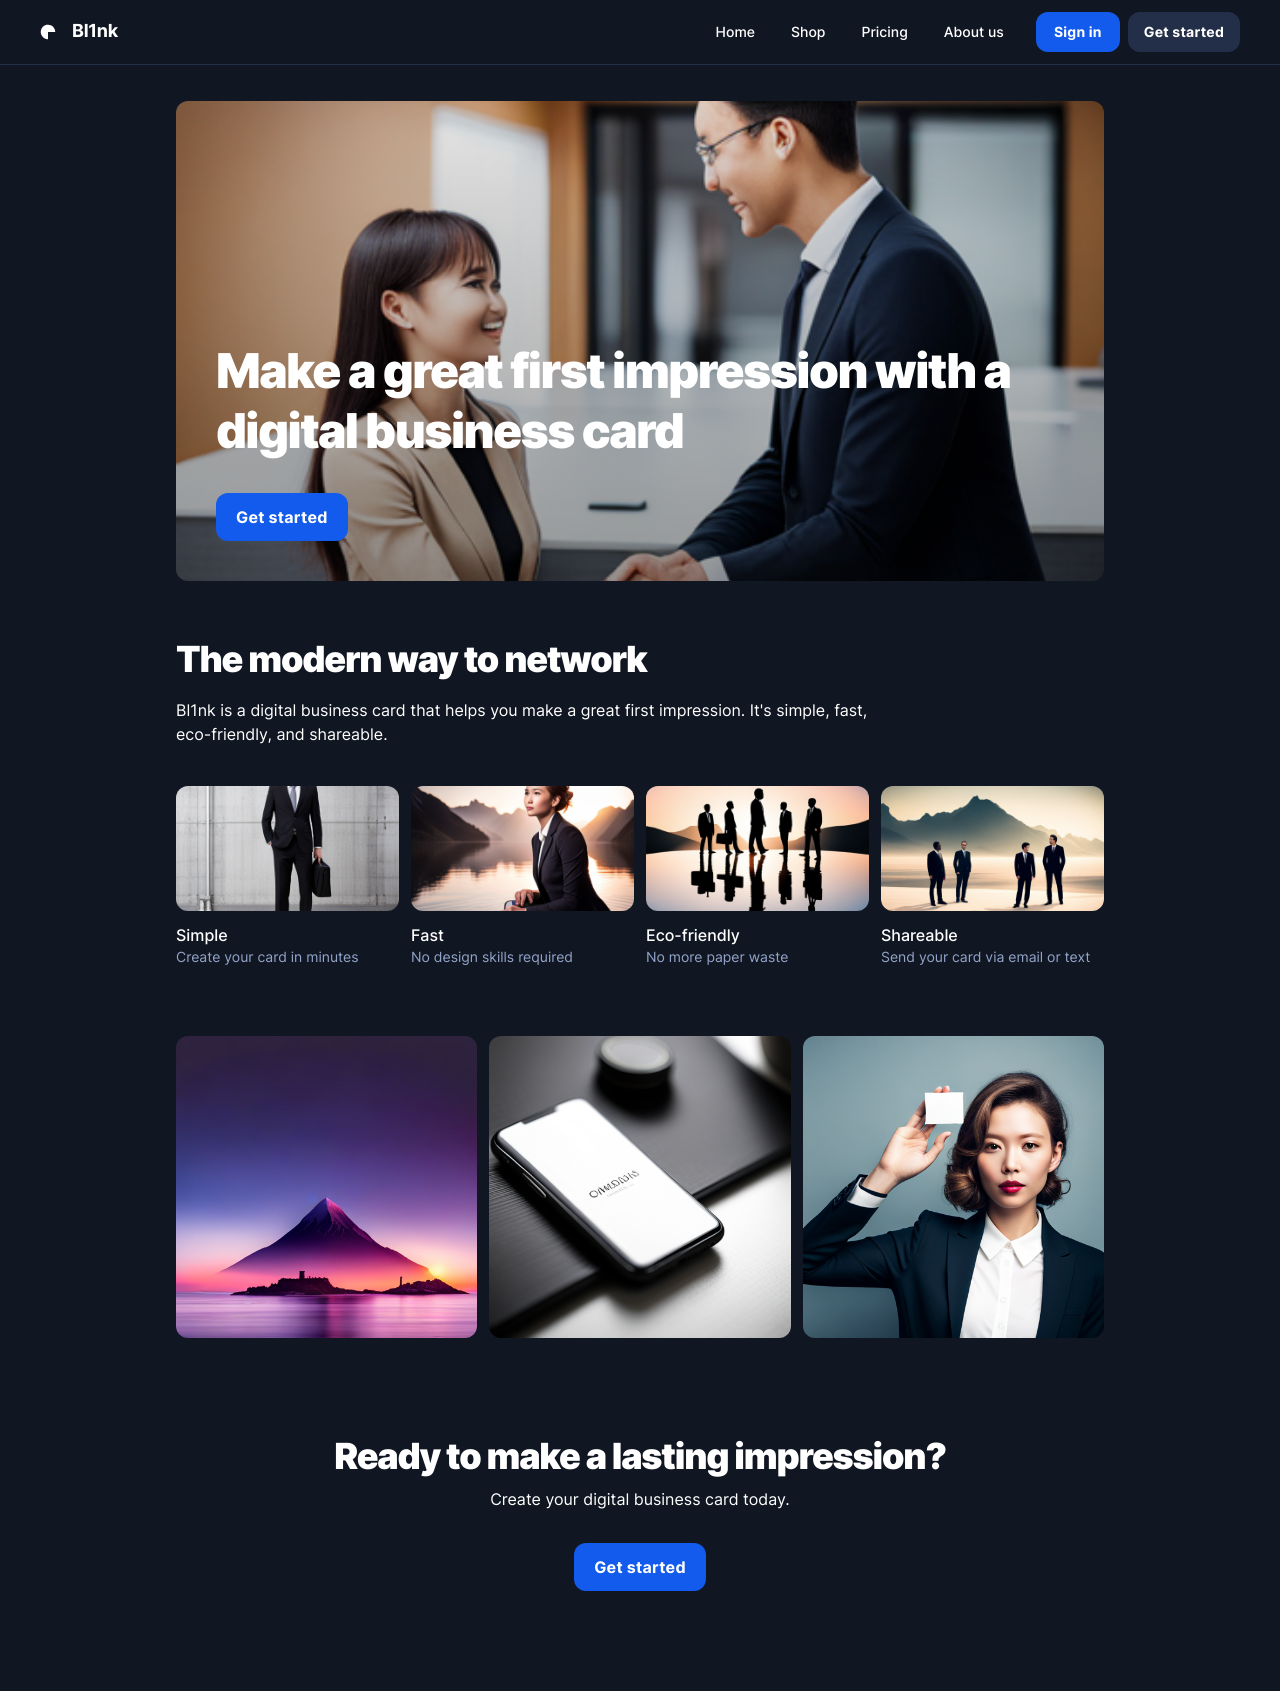 Create a landing page for an NFC digital business card company. The business name is Bl1nk.